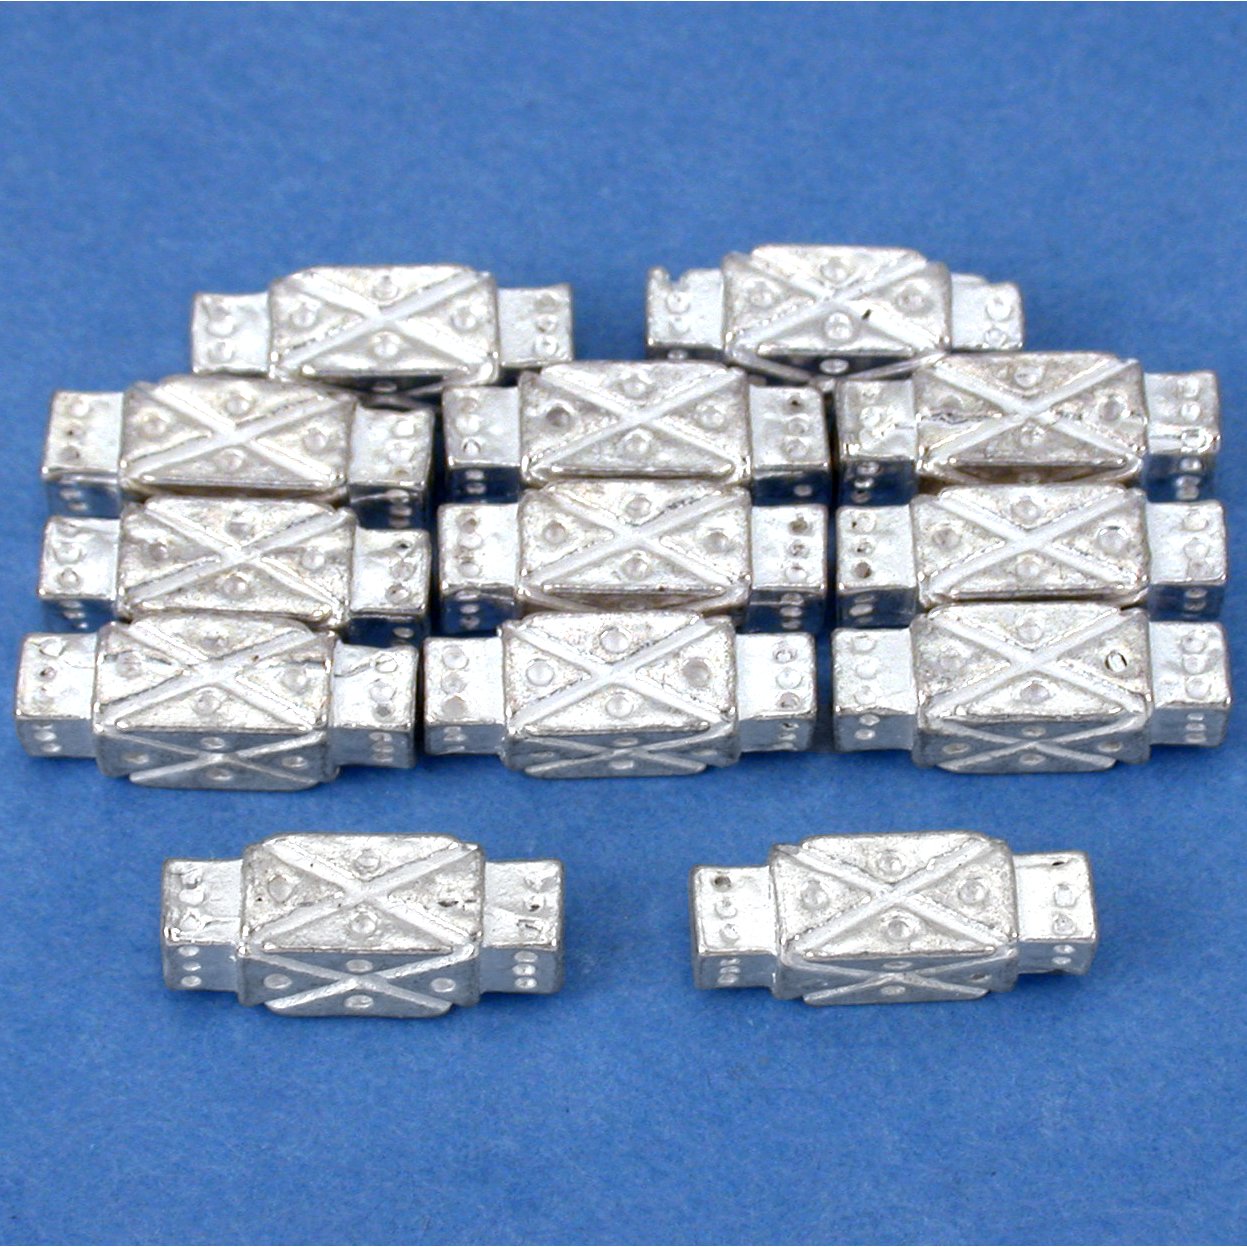 Rectangle Tube Silver Plated Beads 13mm 15 Grams 12Pcs Approx.